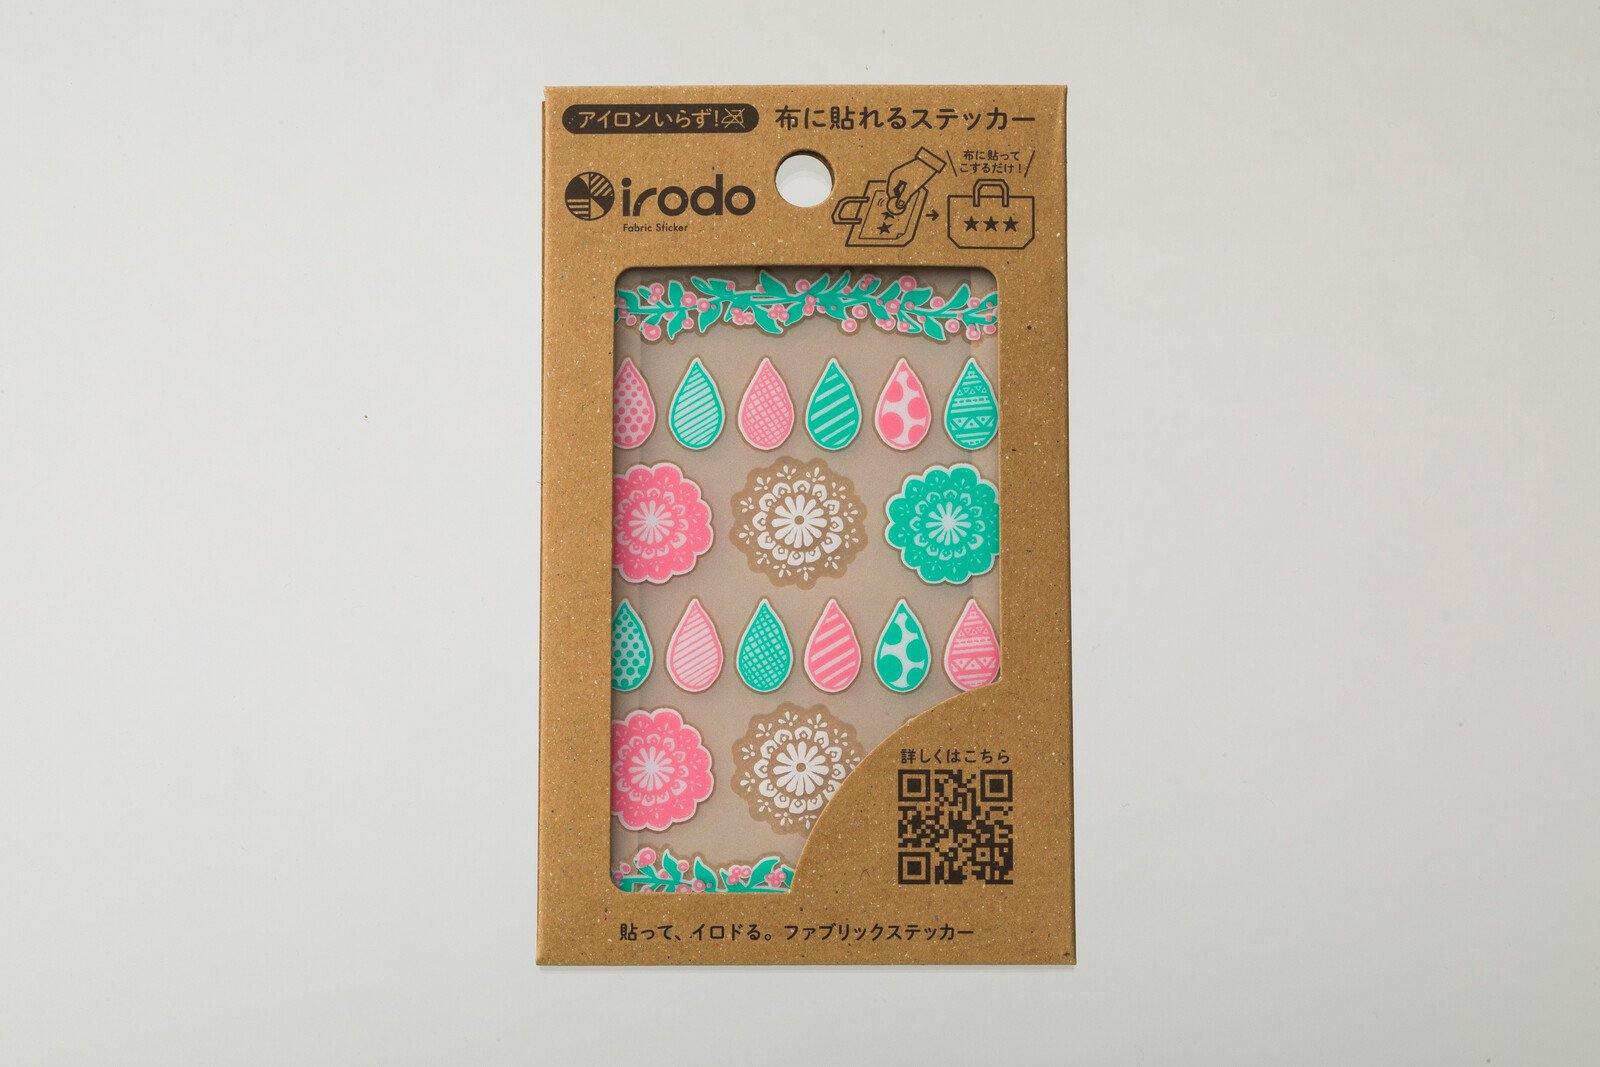 Irodo Fabric Decorating Transfer Sticker - Lace Pink & Green | papermindstationery.com